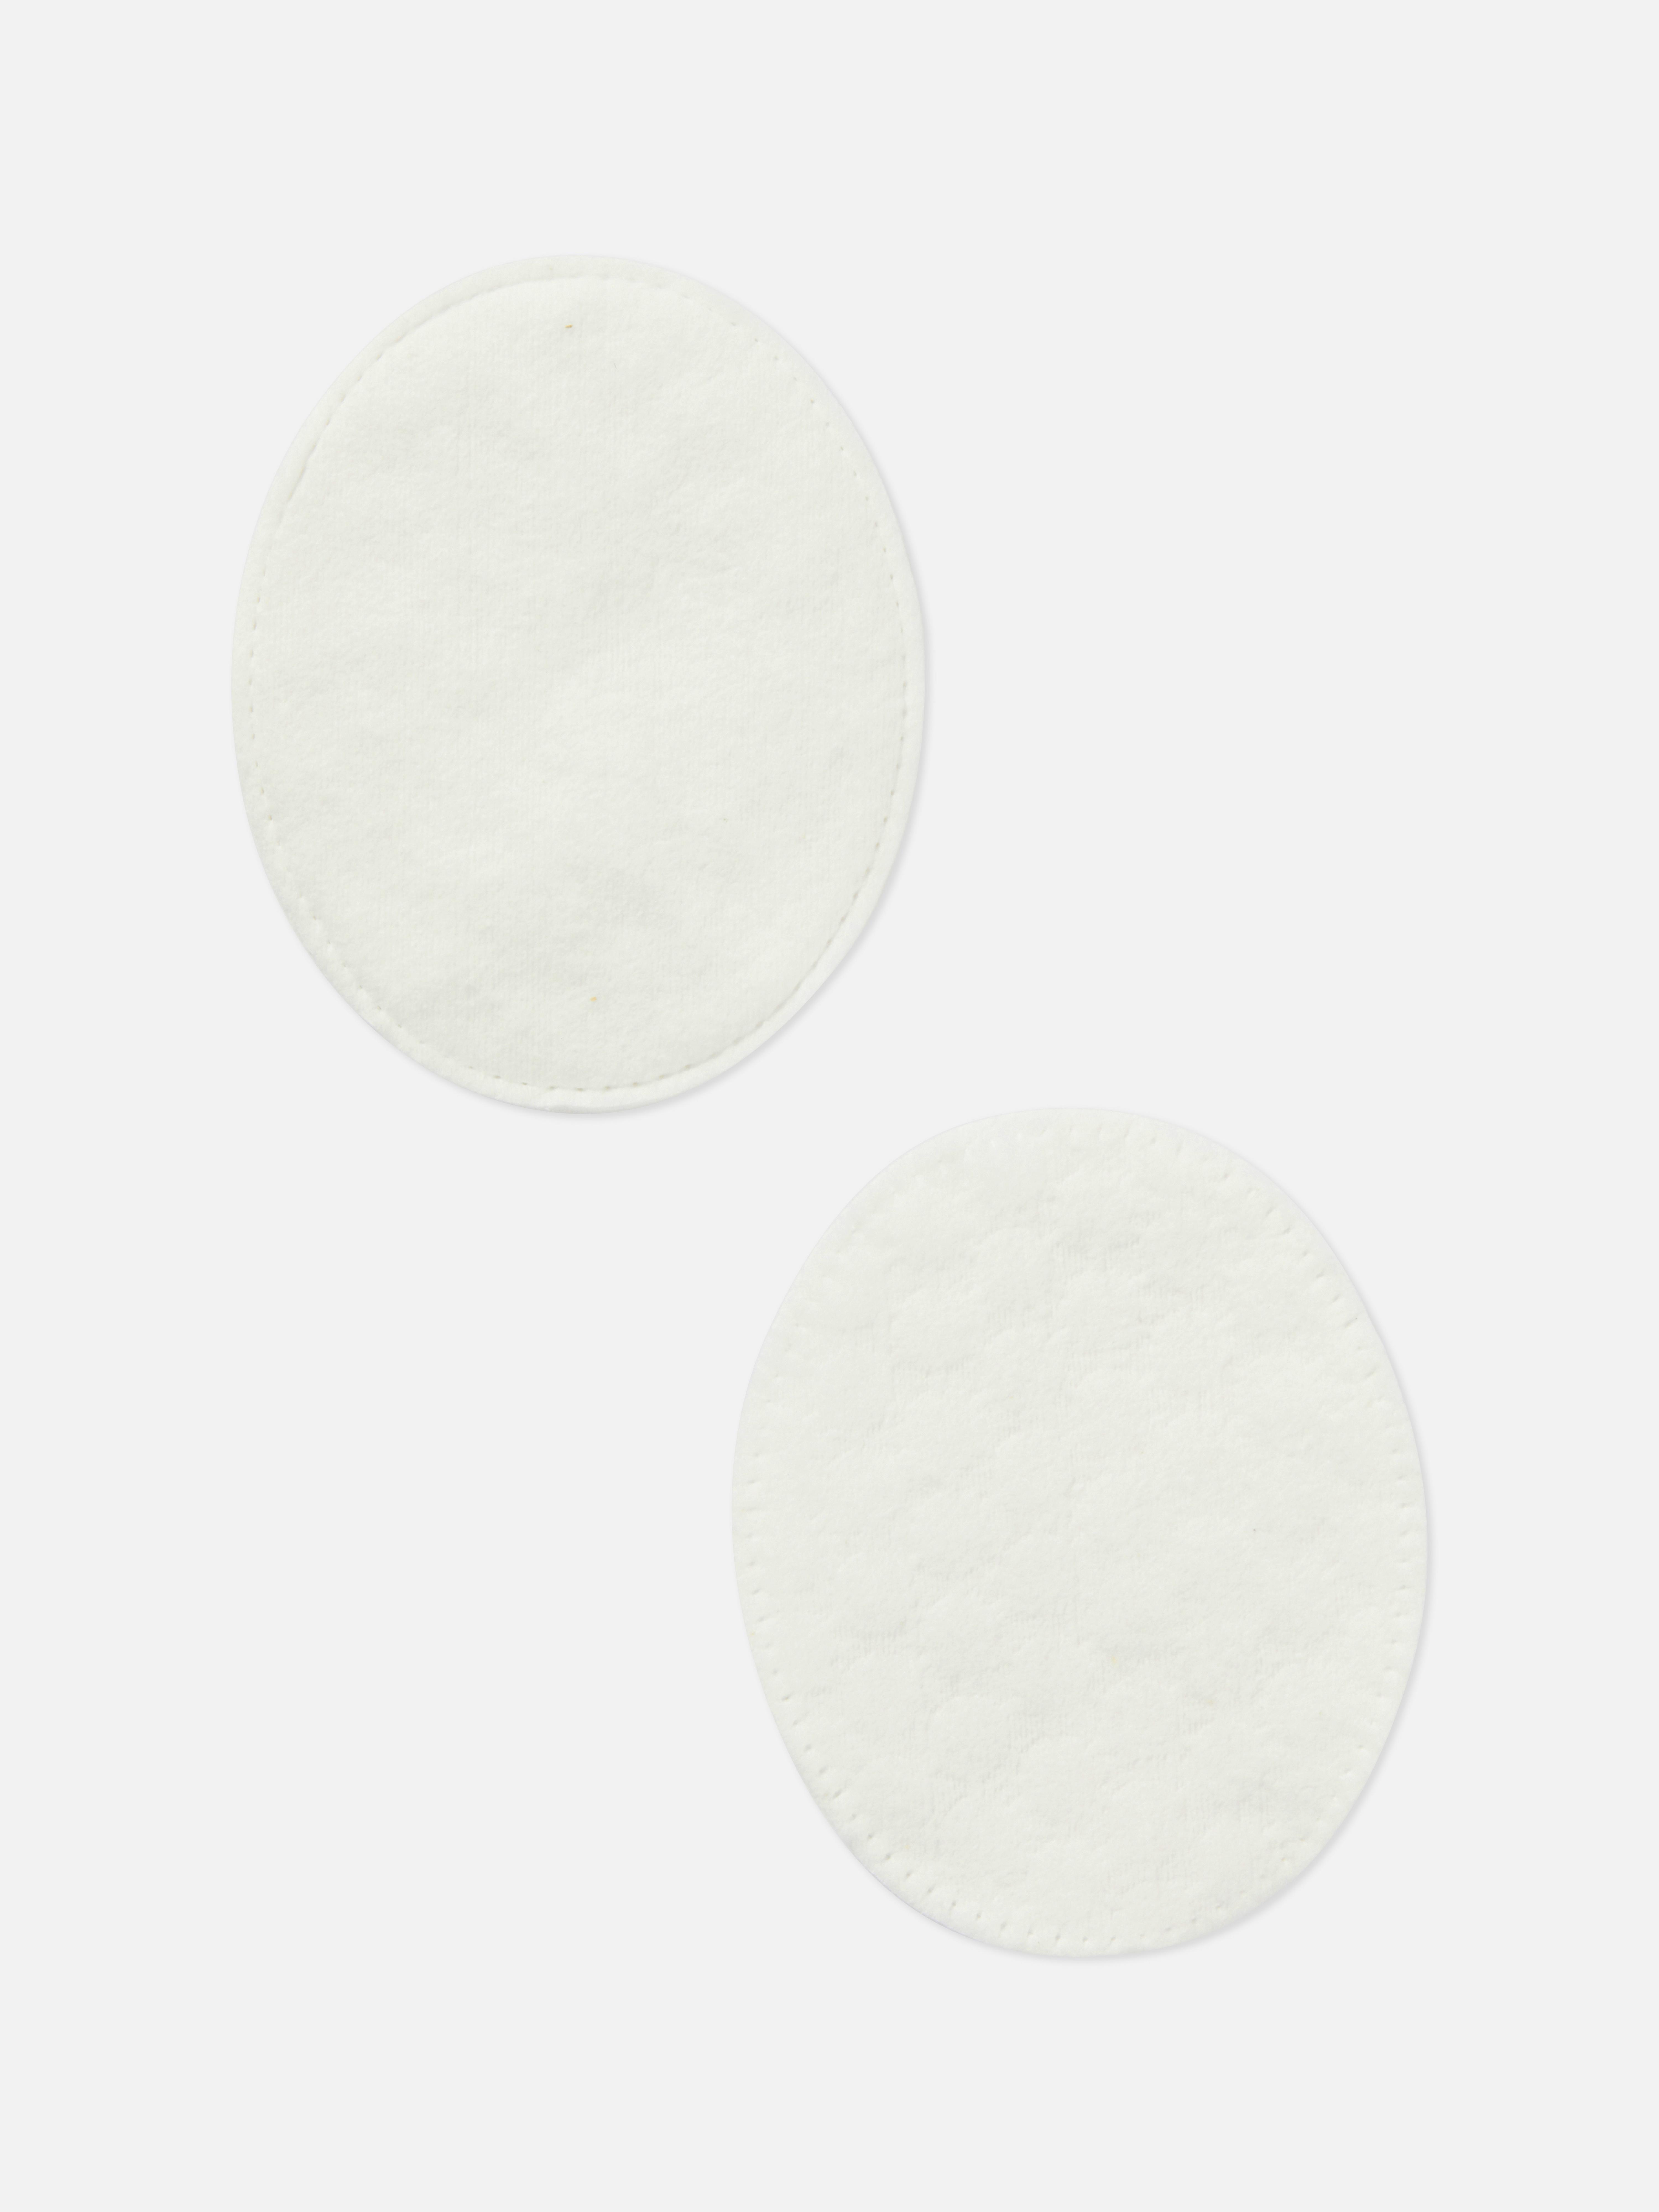 PS 50pk Oval Cotton Cosmetic Pads